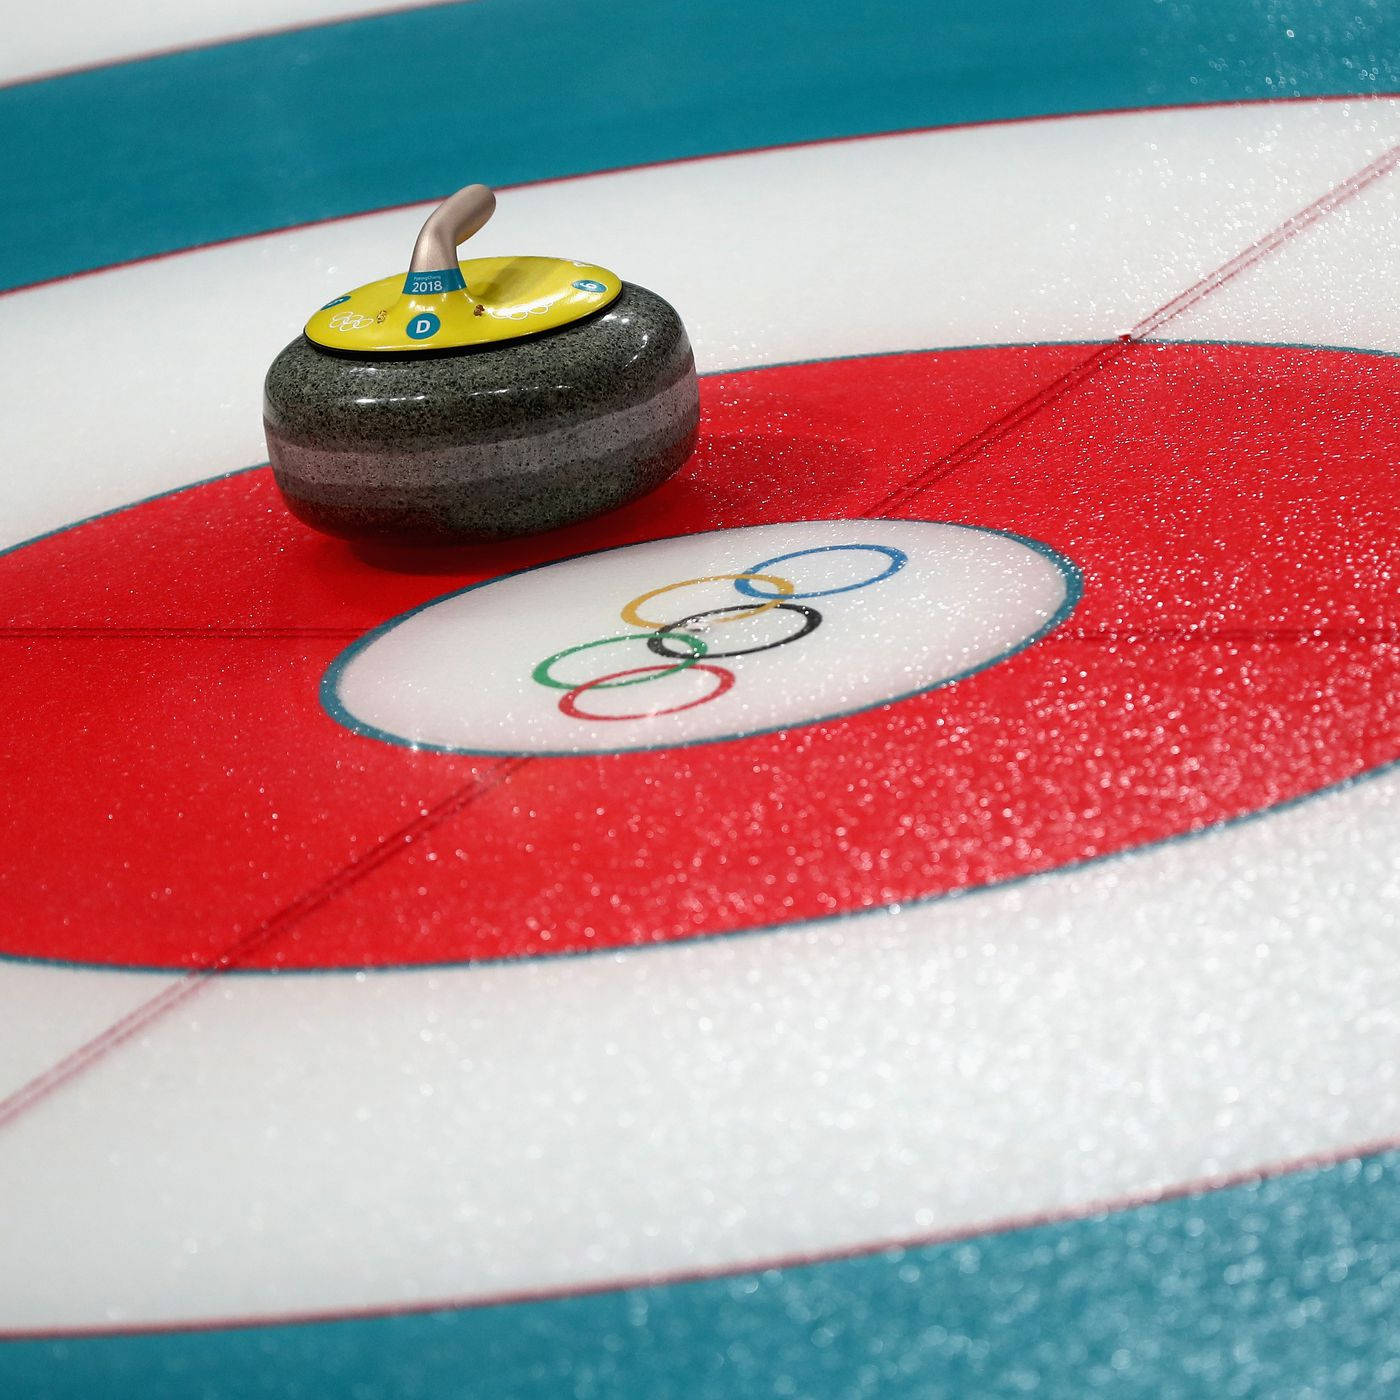 Curling Stone On The Target Wallpaper